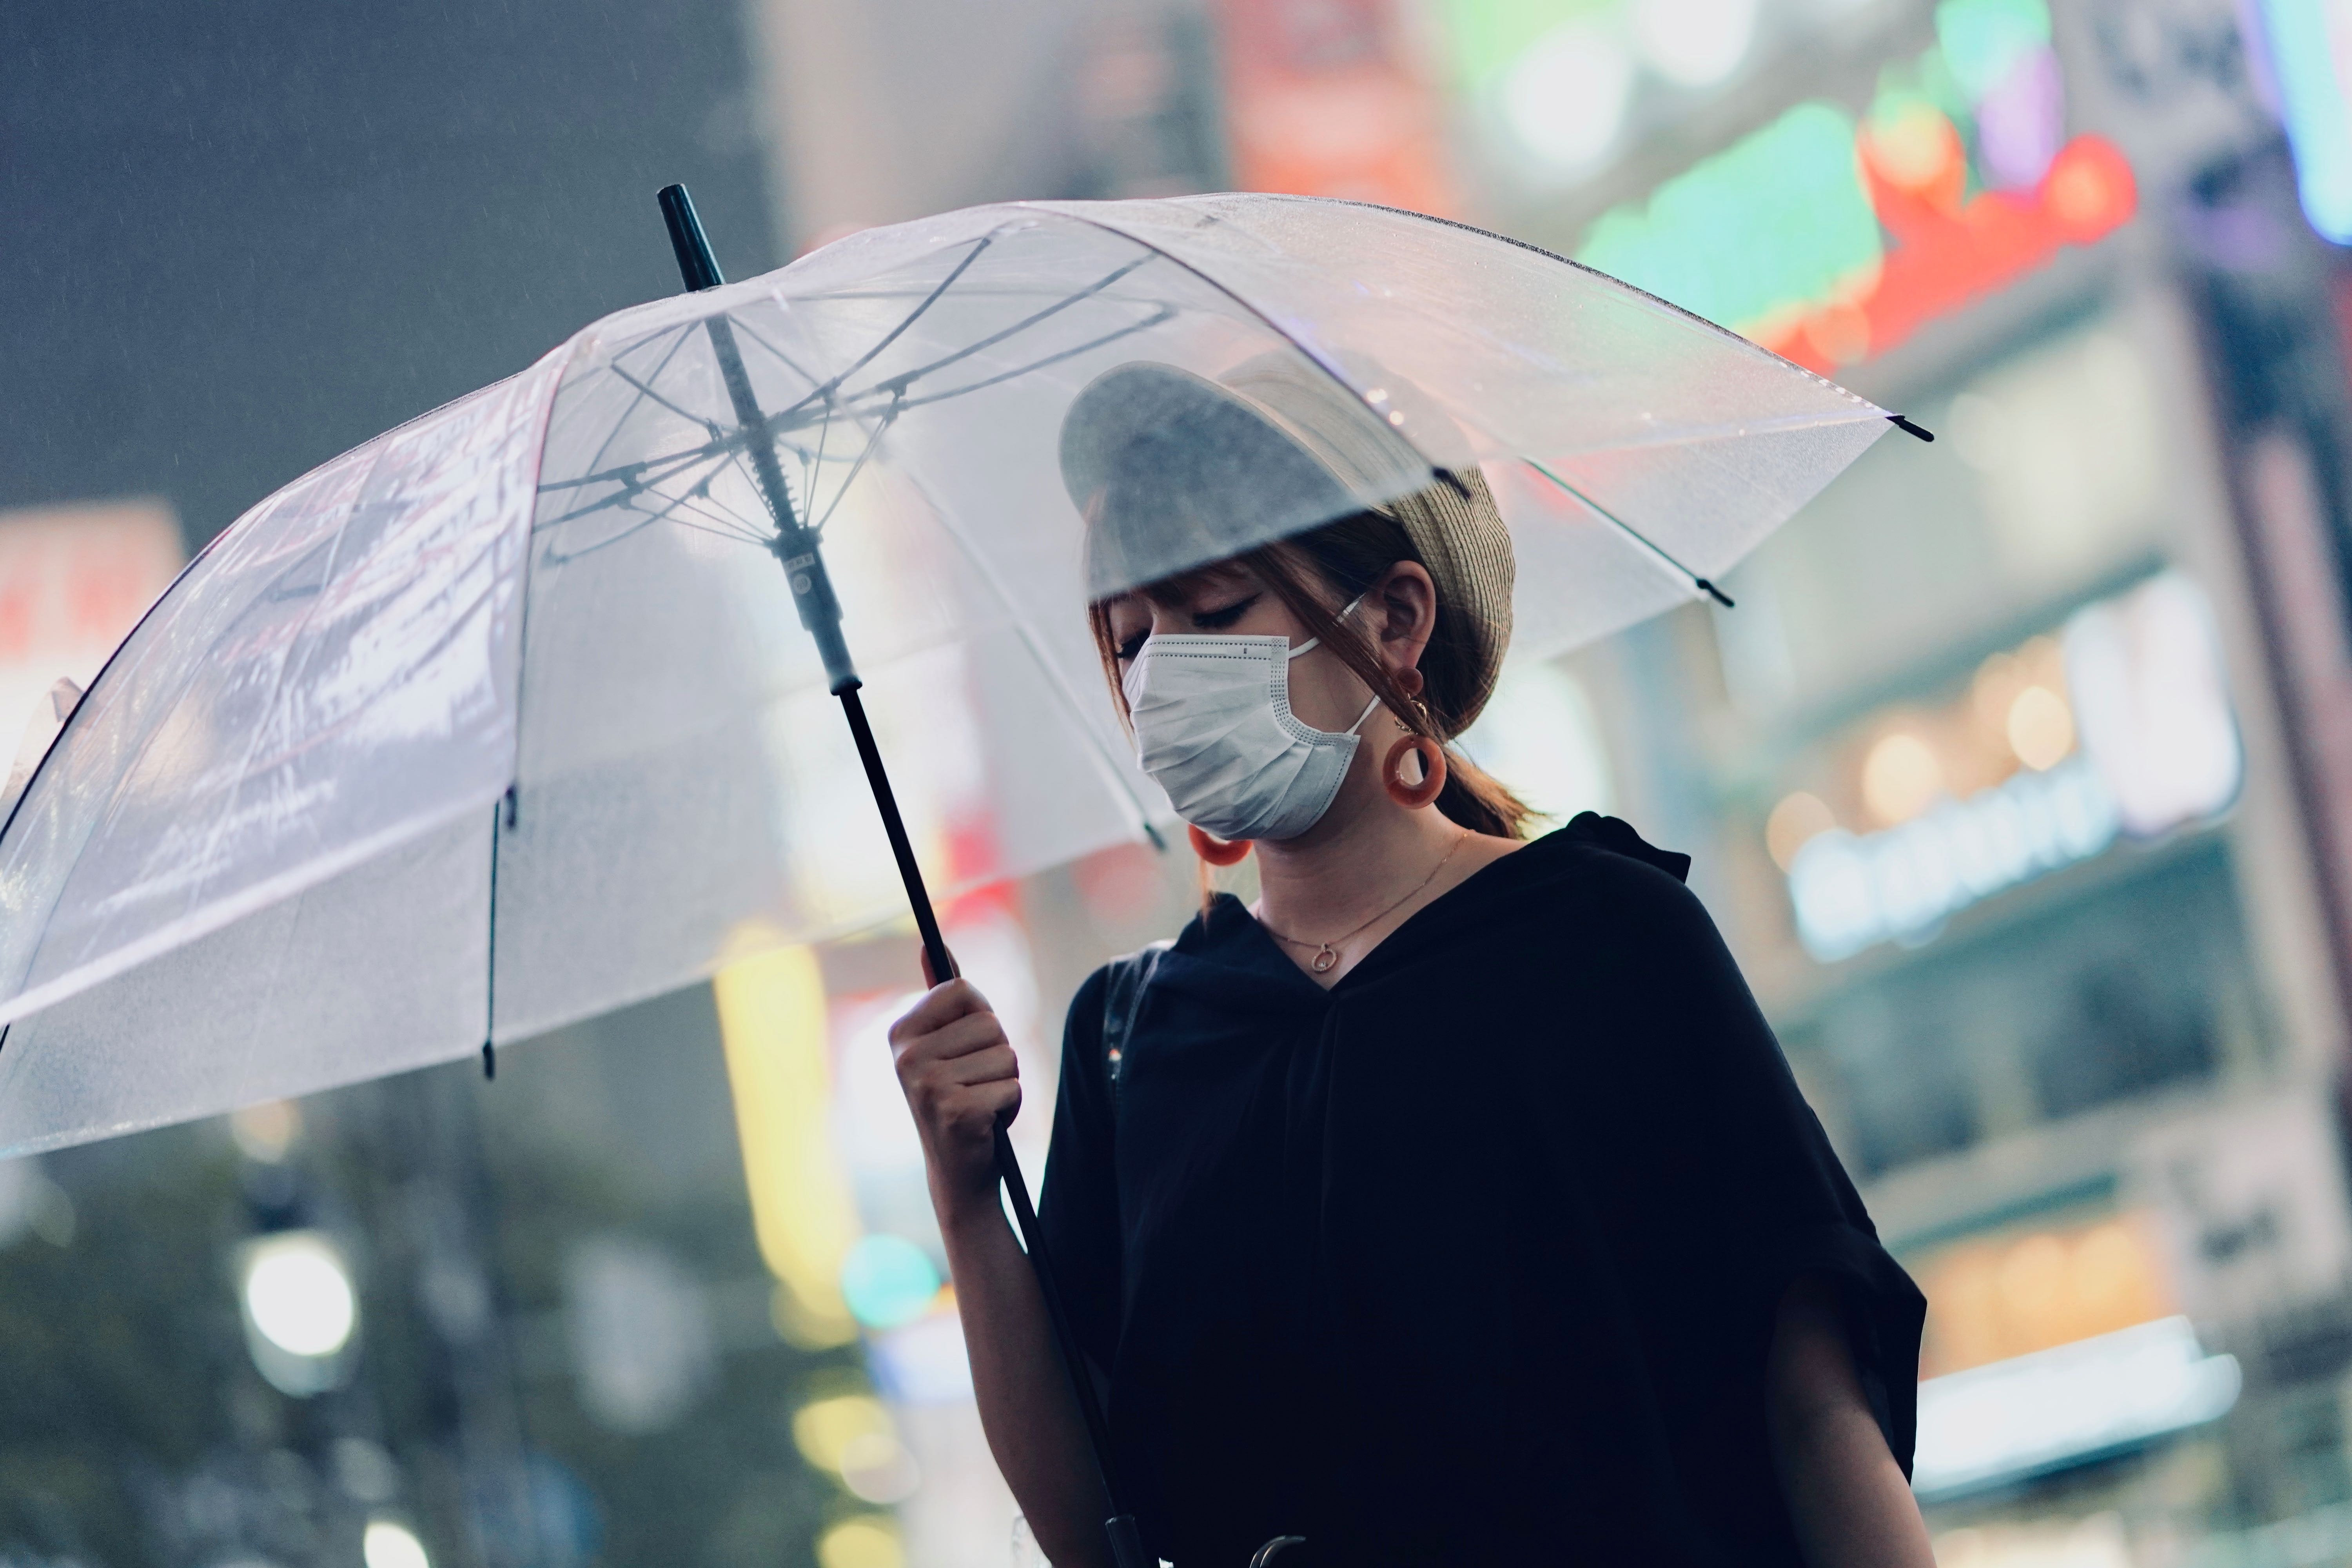 Protect your small retail business during the coronavirus outbreak